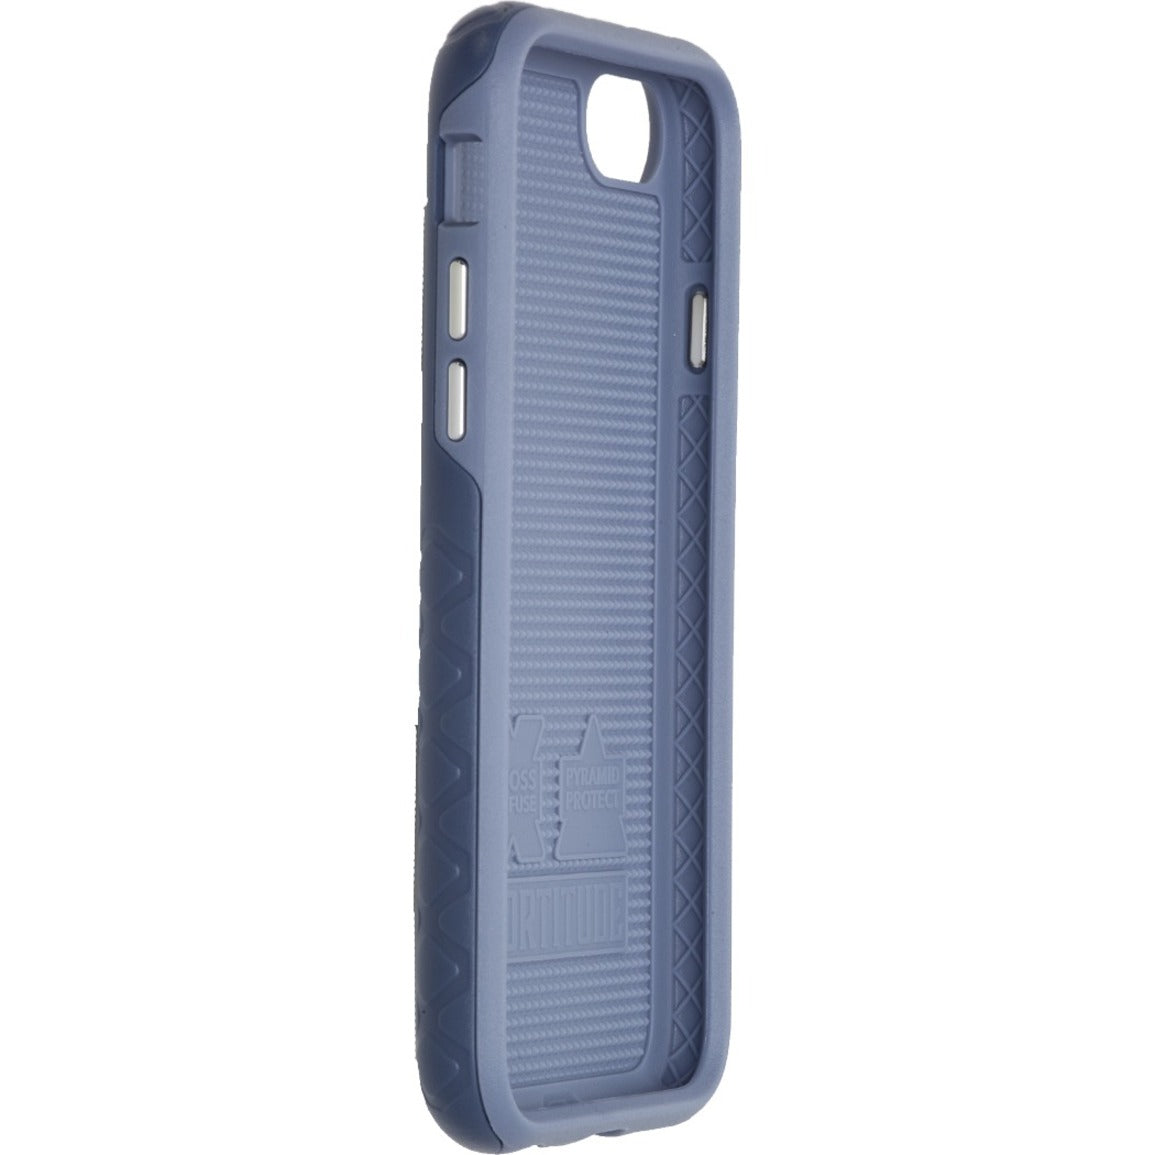 Cellhelmet CHPCFO-I8-SB Fortitude Series for Apple iPhone SE (2020) / 6 / 7 / 8 - Slate Blue, Rugged Case with Impact and Heat Resistance